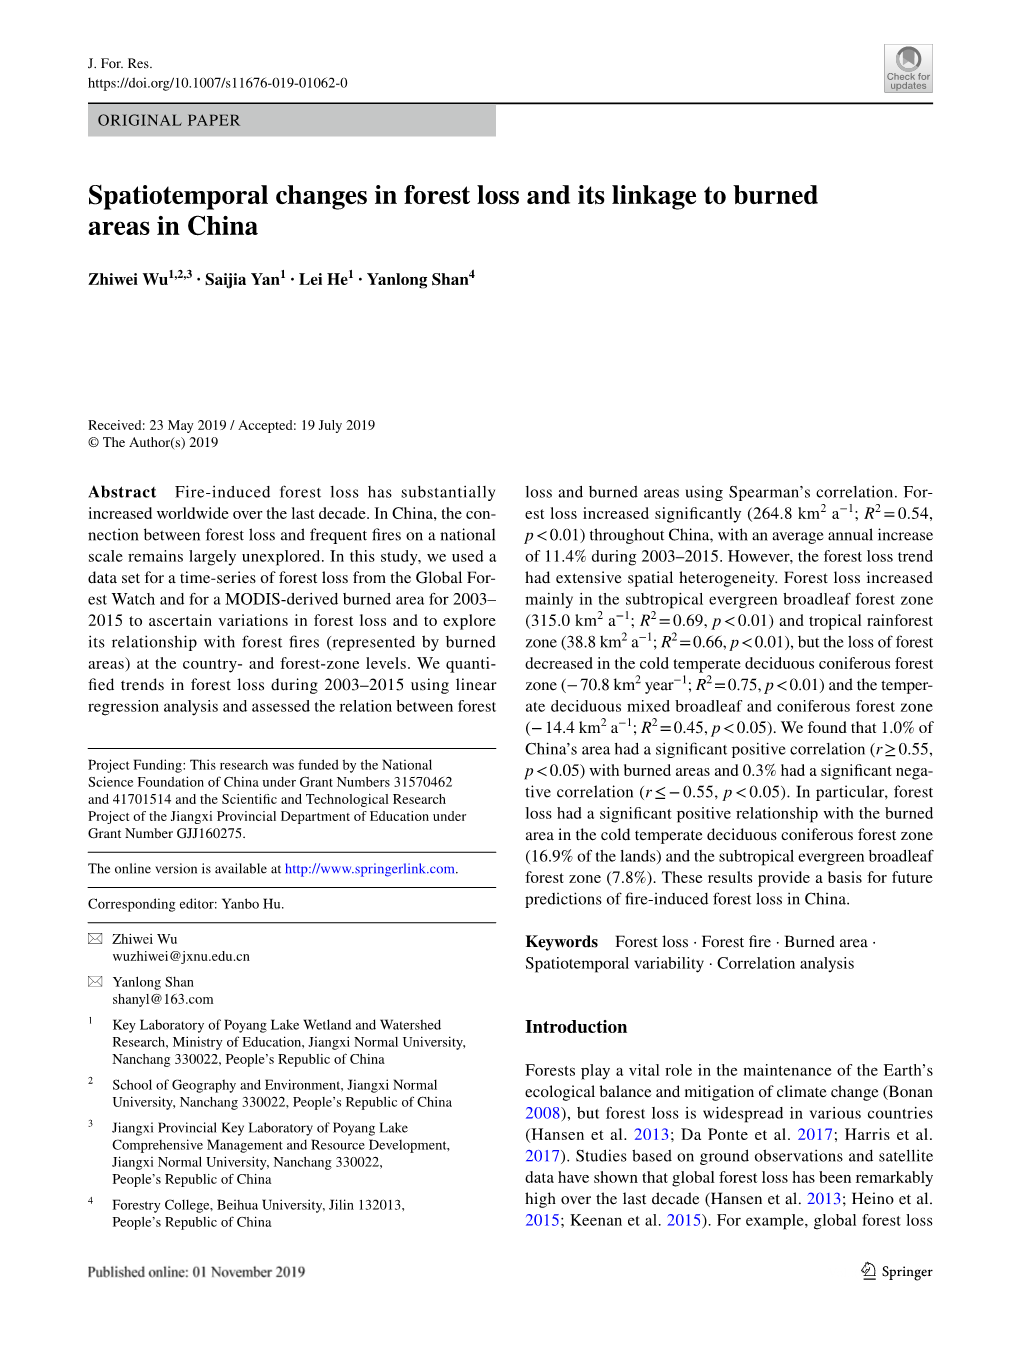 Spatiotemporal Changes in Forest Loss and Its Linkage to Burned Areas in China